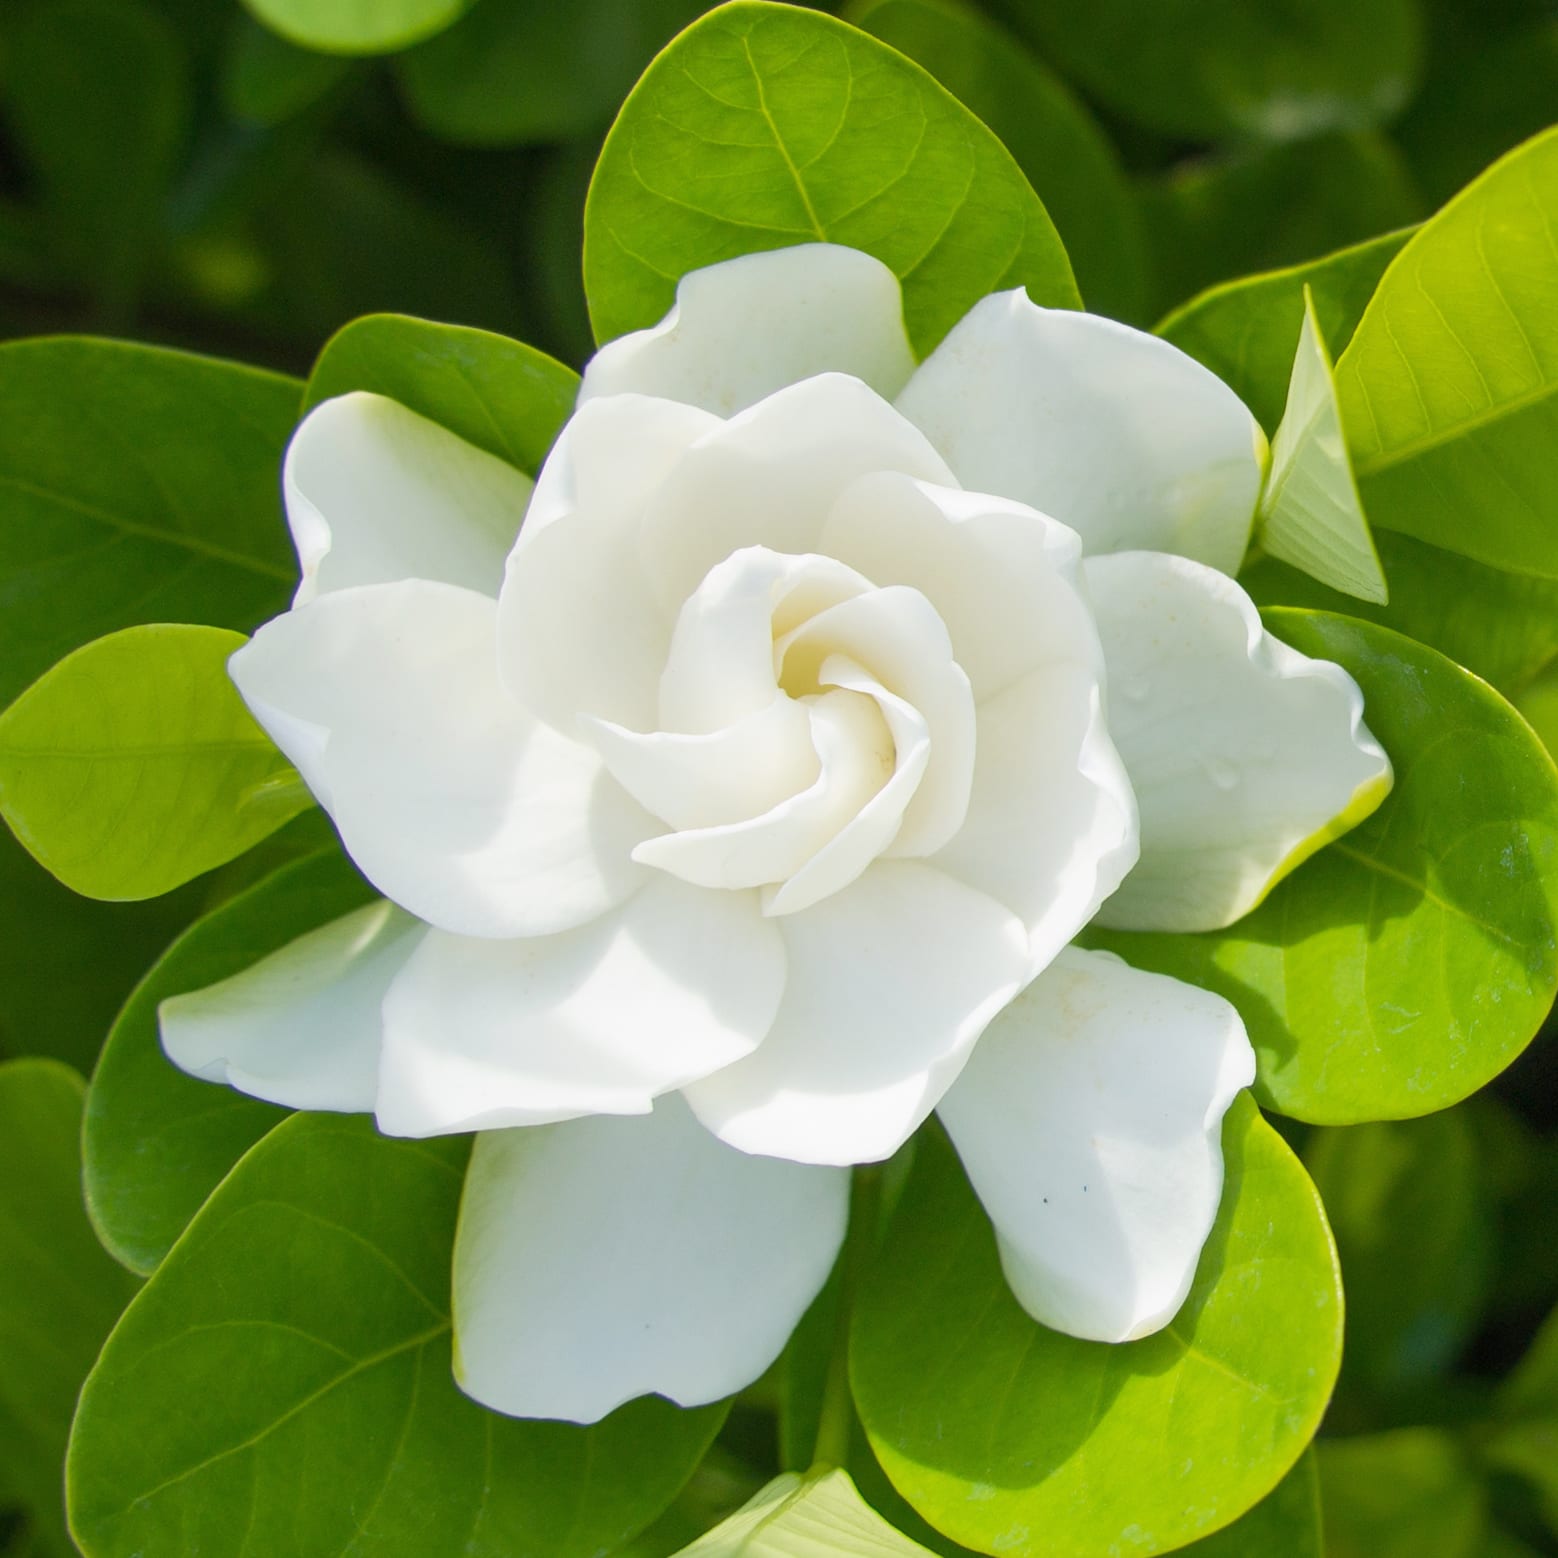 Hope Fragrances embraces the scent of gardenia